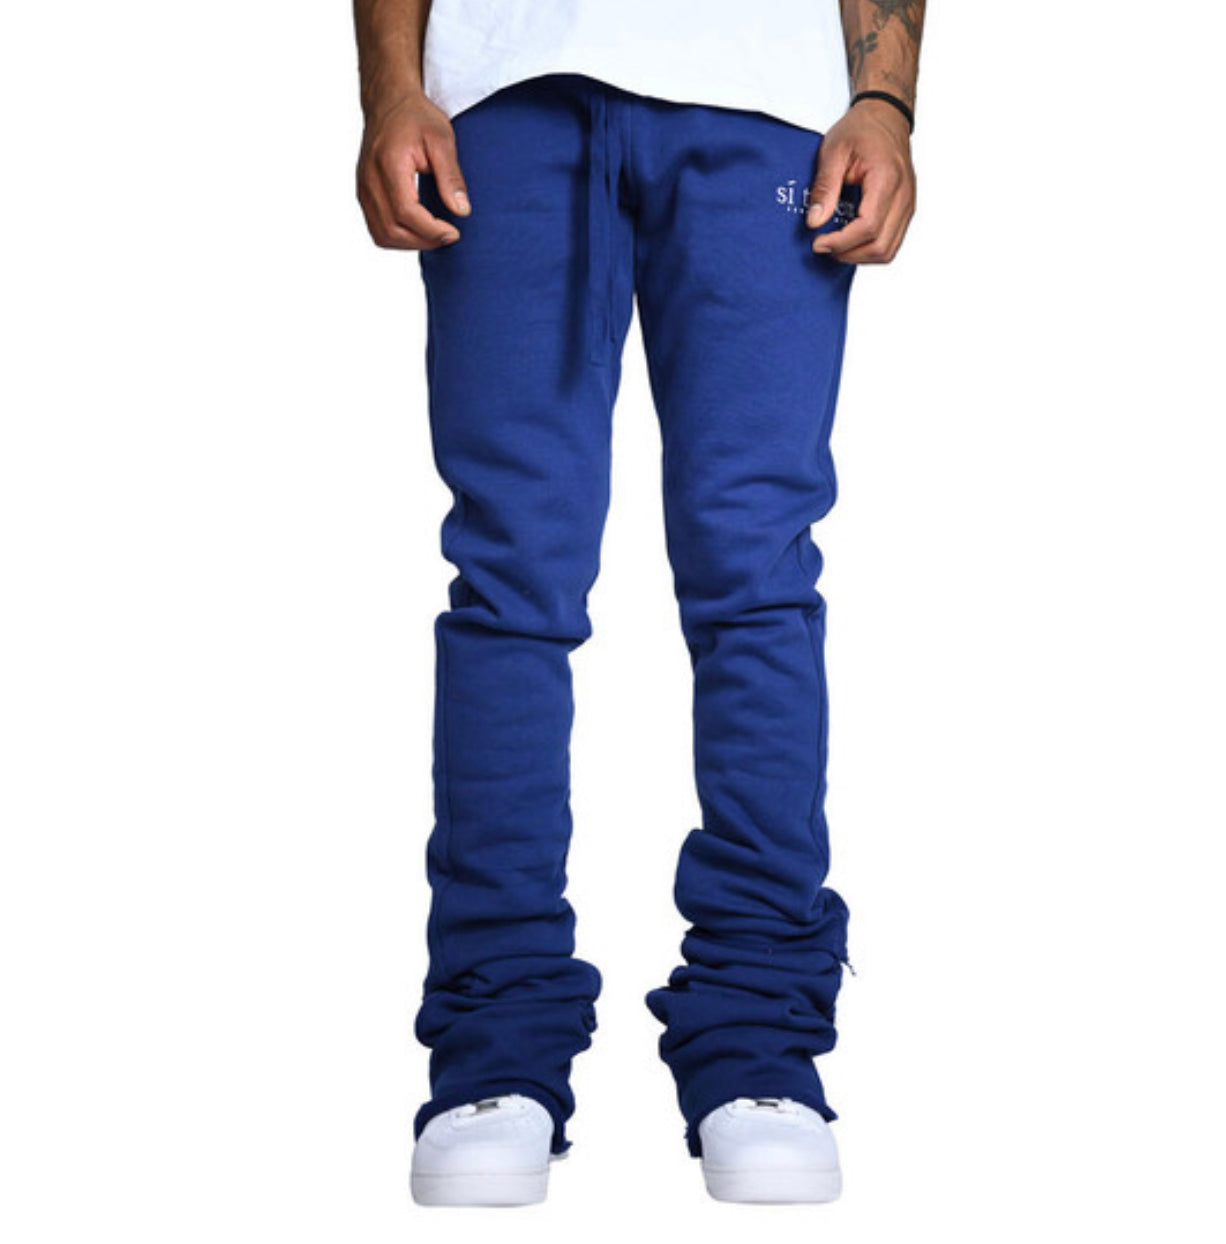 flare nike sweatpants - Buy flare nike sweatpants with free shipping on  AliExpress